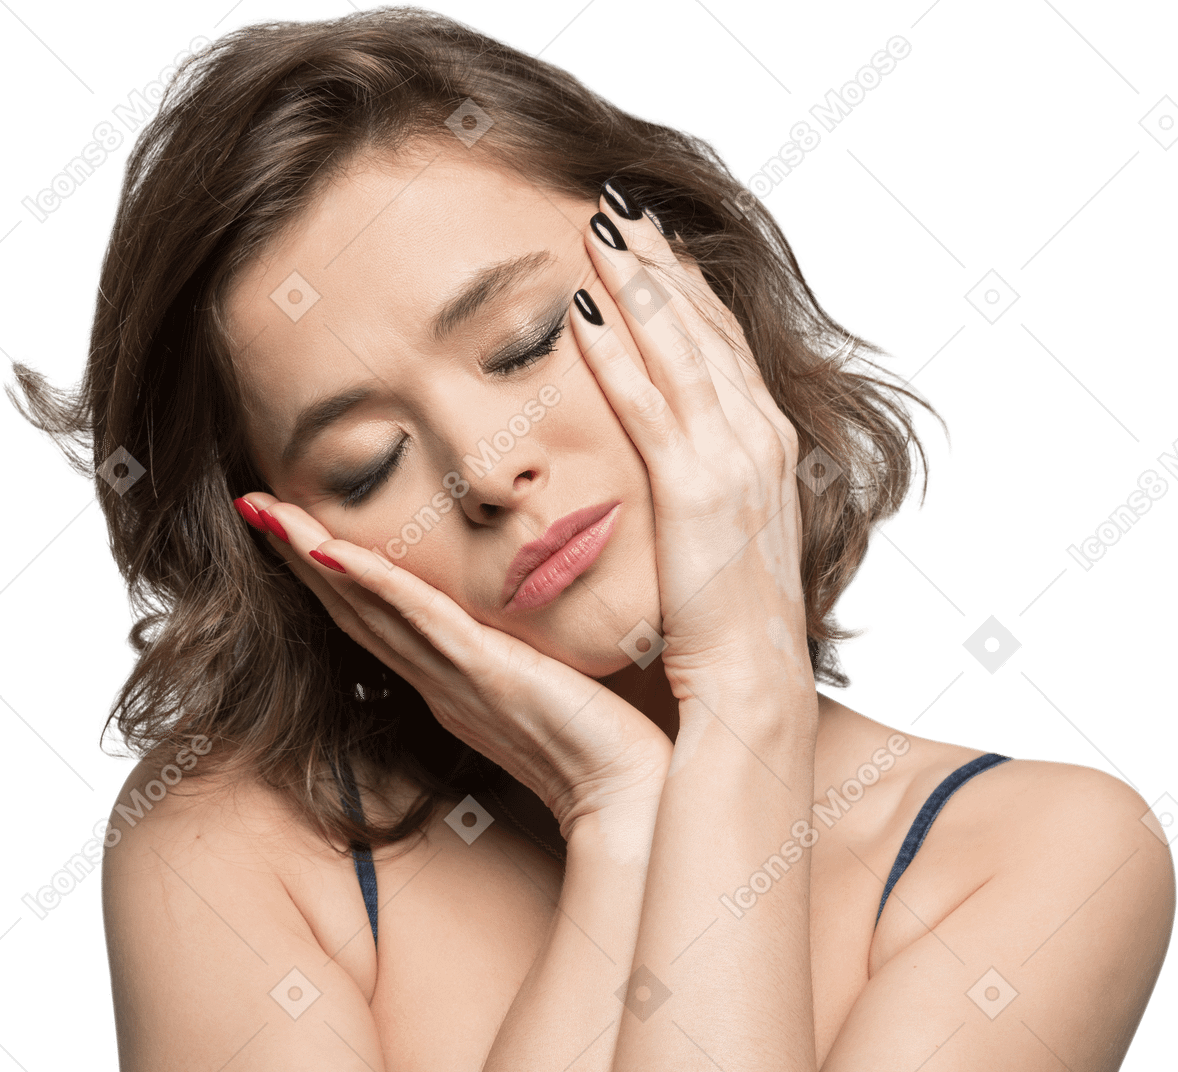 Portrait of a cute brunette woman with closed eyes